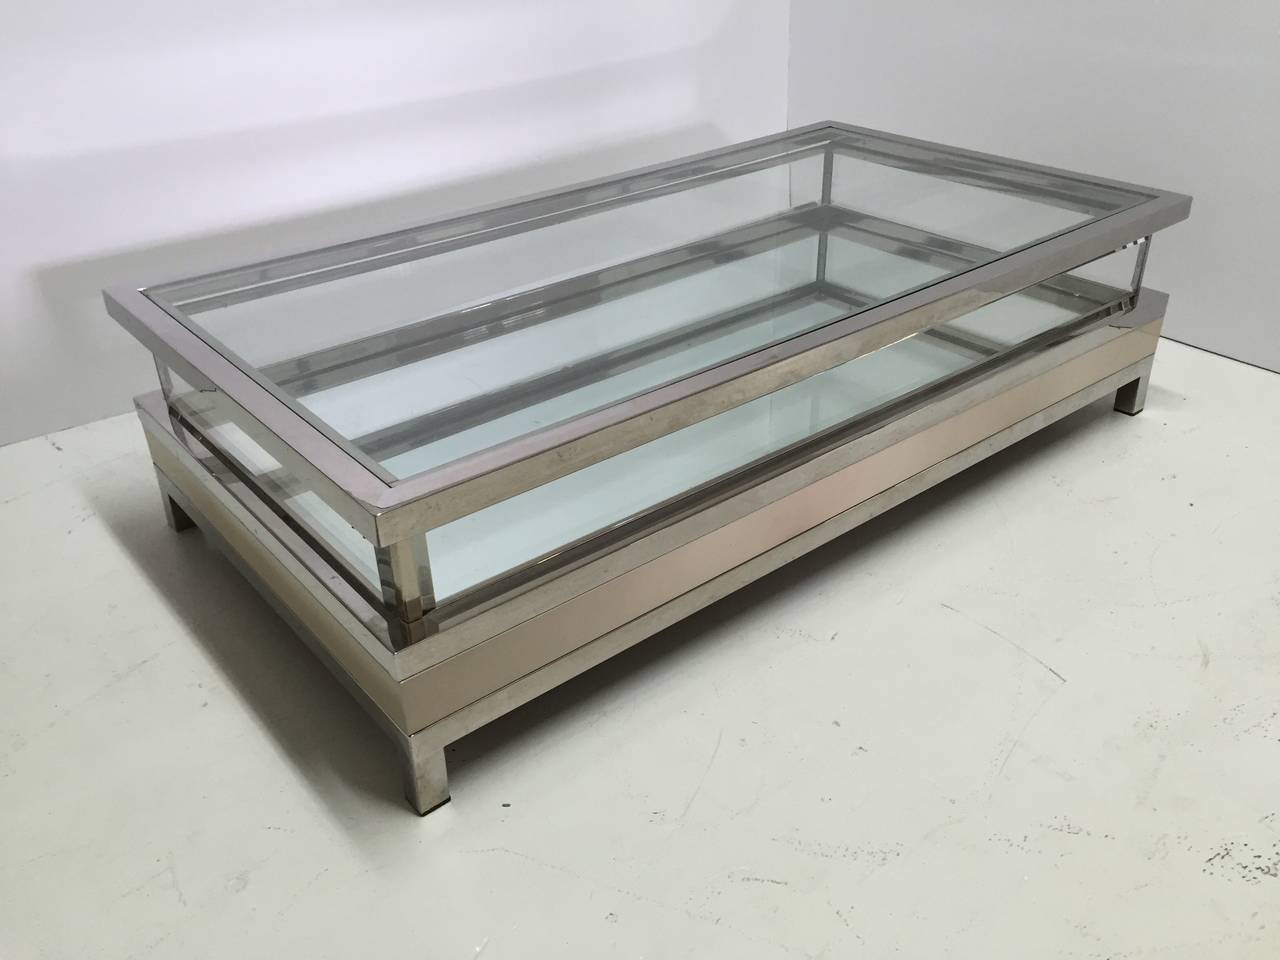 Coffee table in polished steel, glass, perspex and cream enamel with mirror bottom by Maison Jansen. Top slides open for access to inside and when closed, can be locked with key.